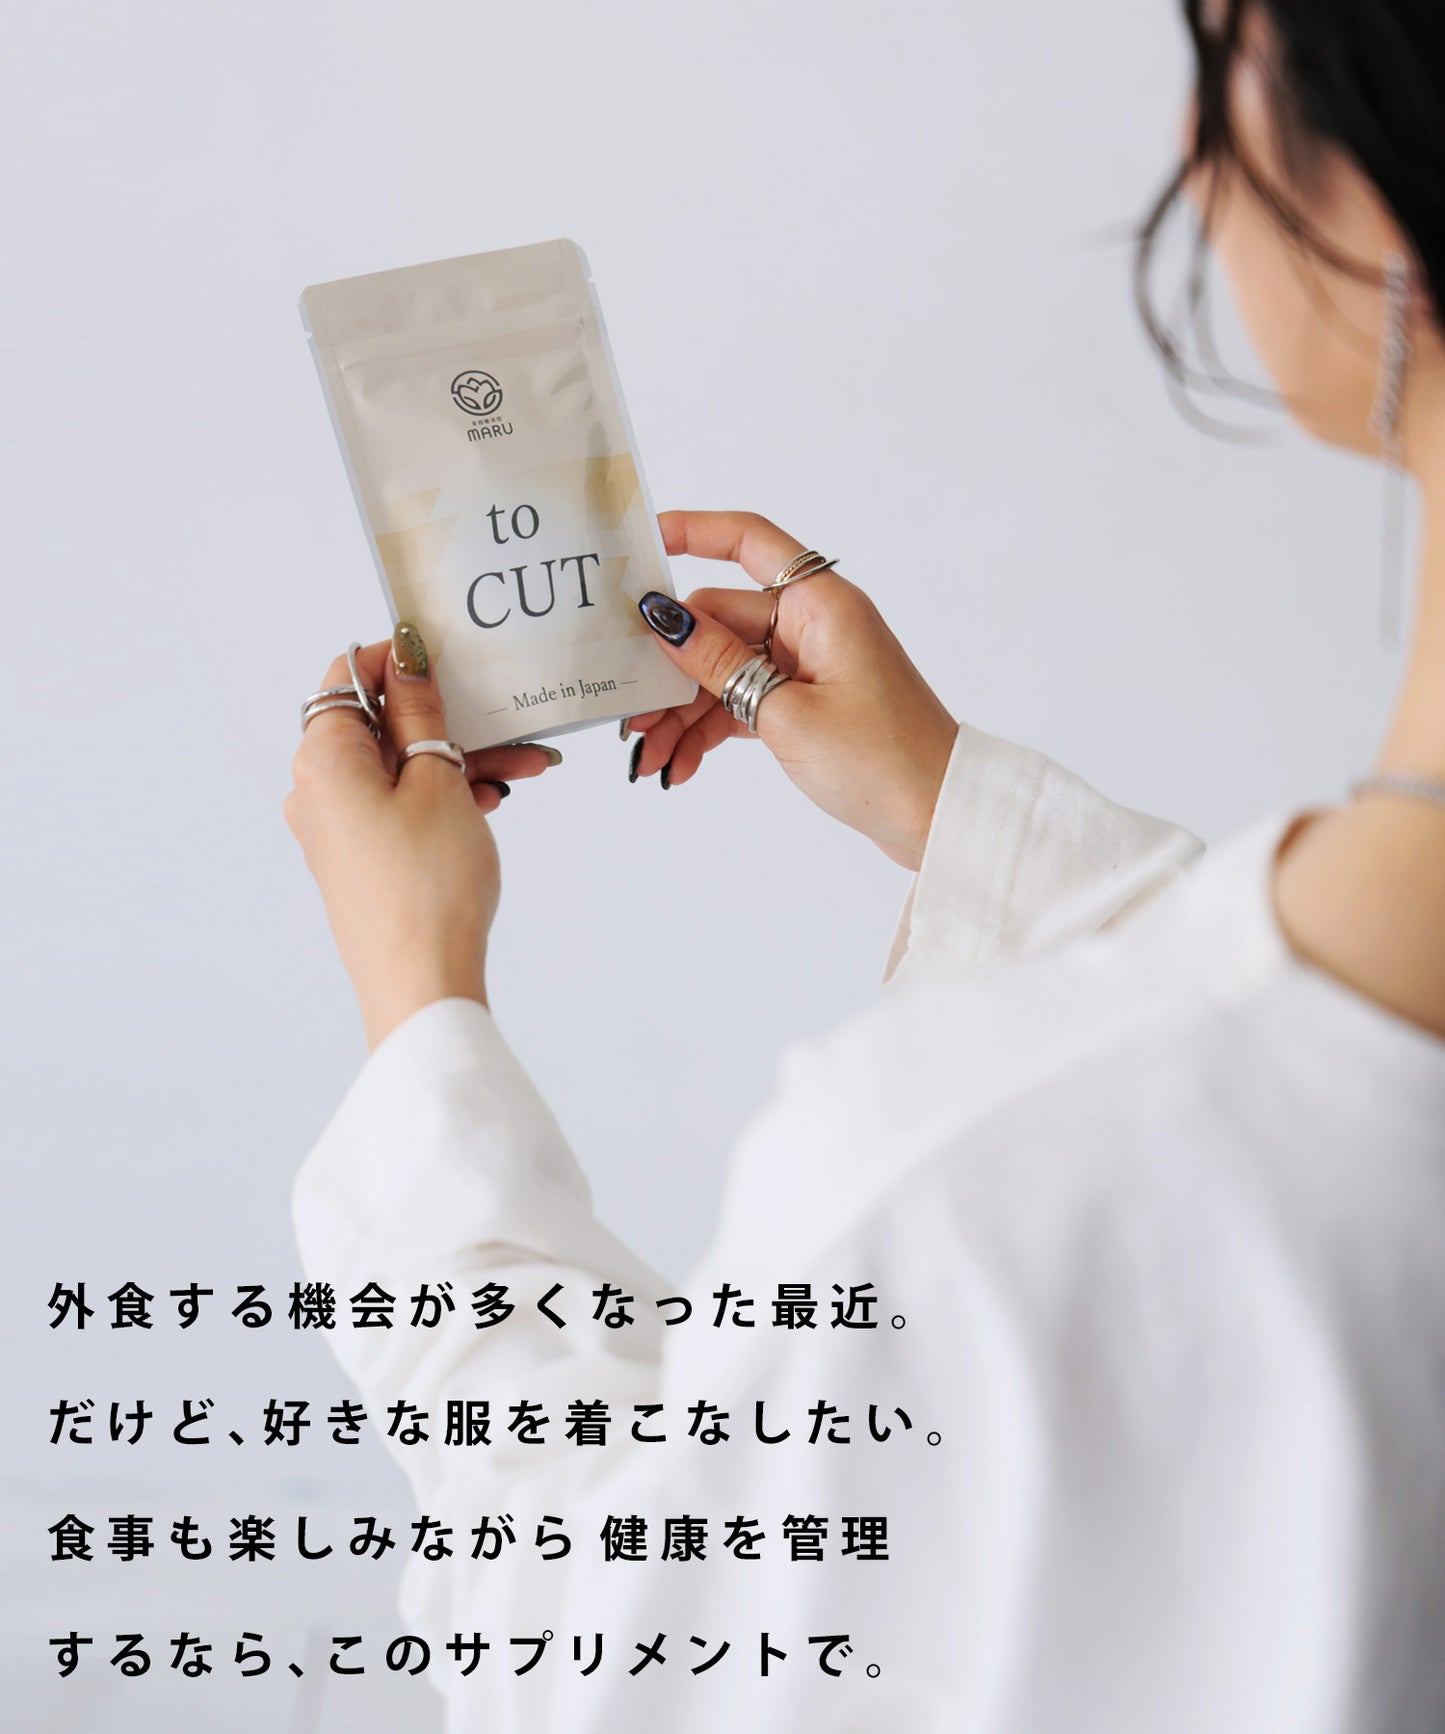 【to CUT】トウカット